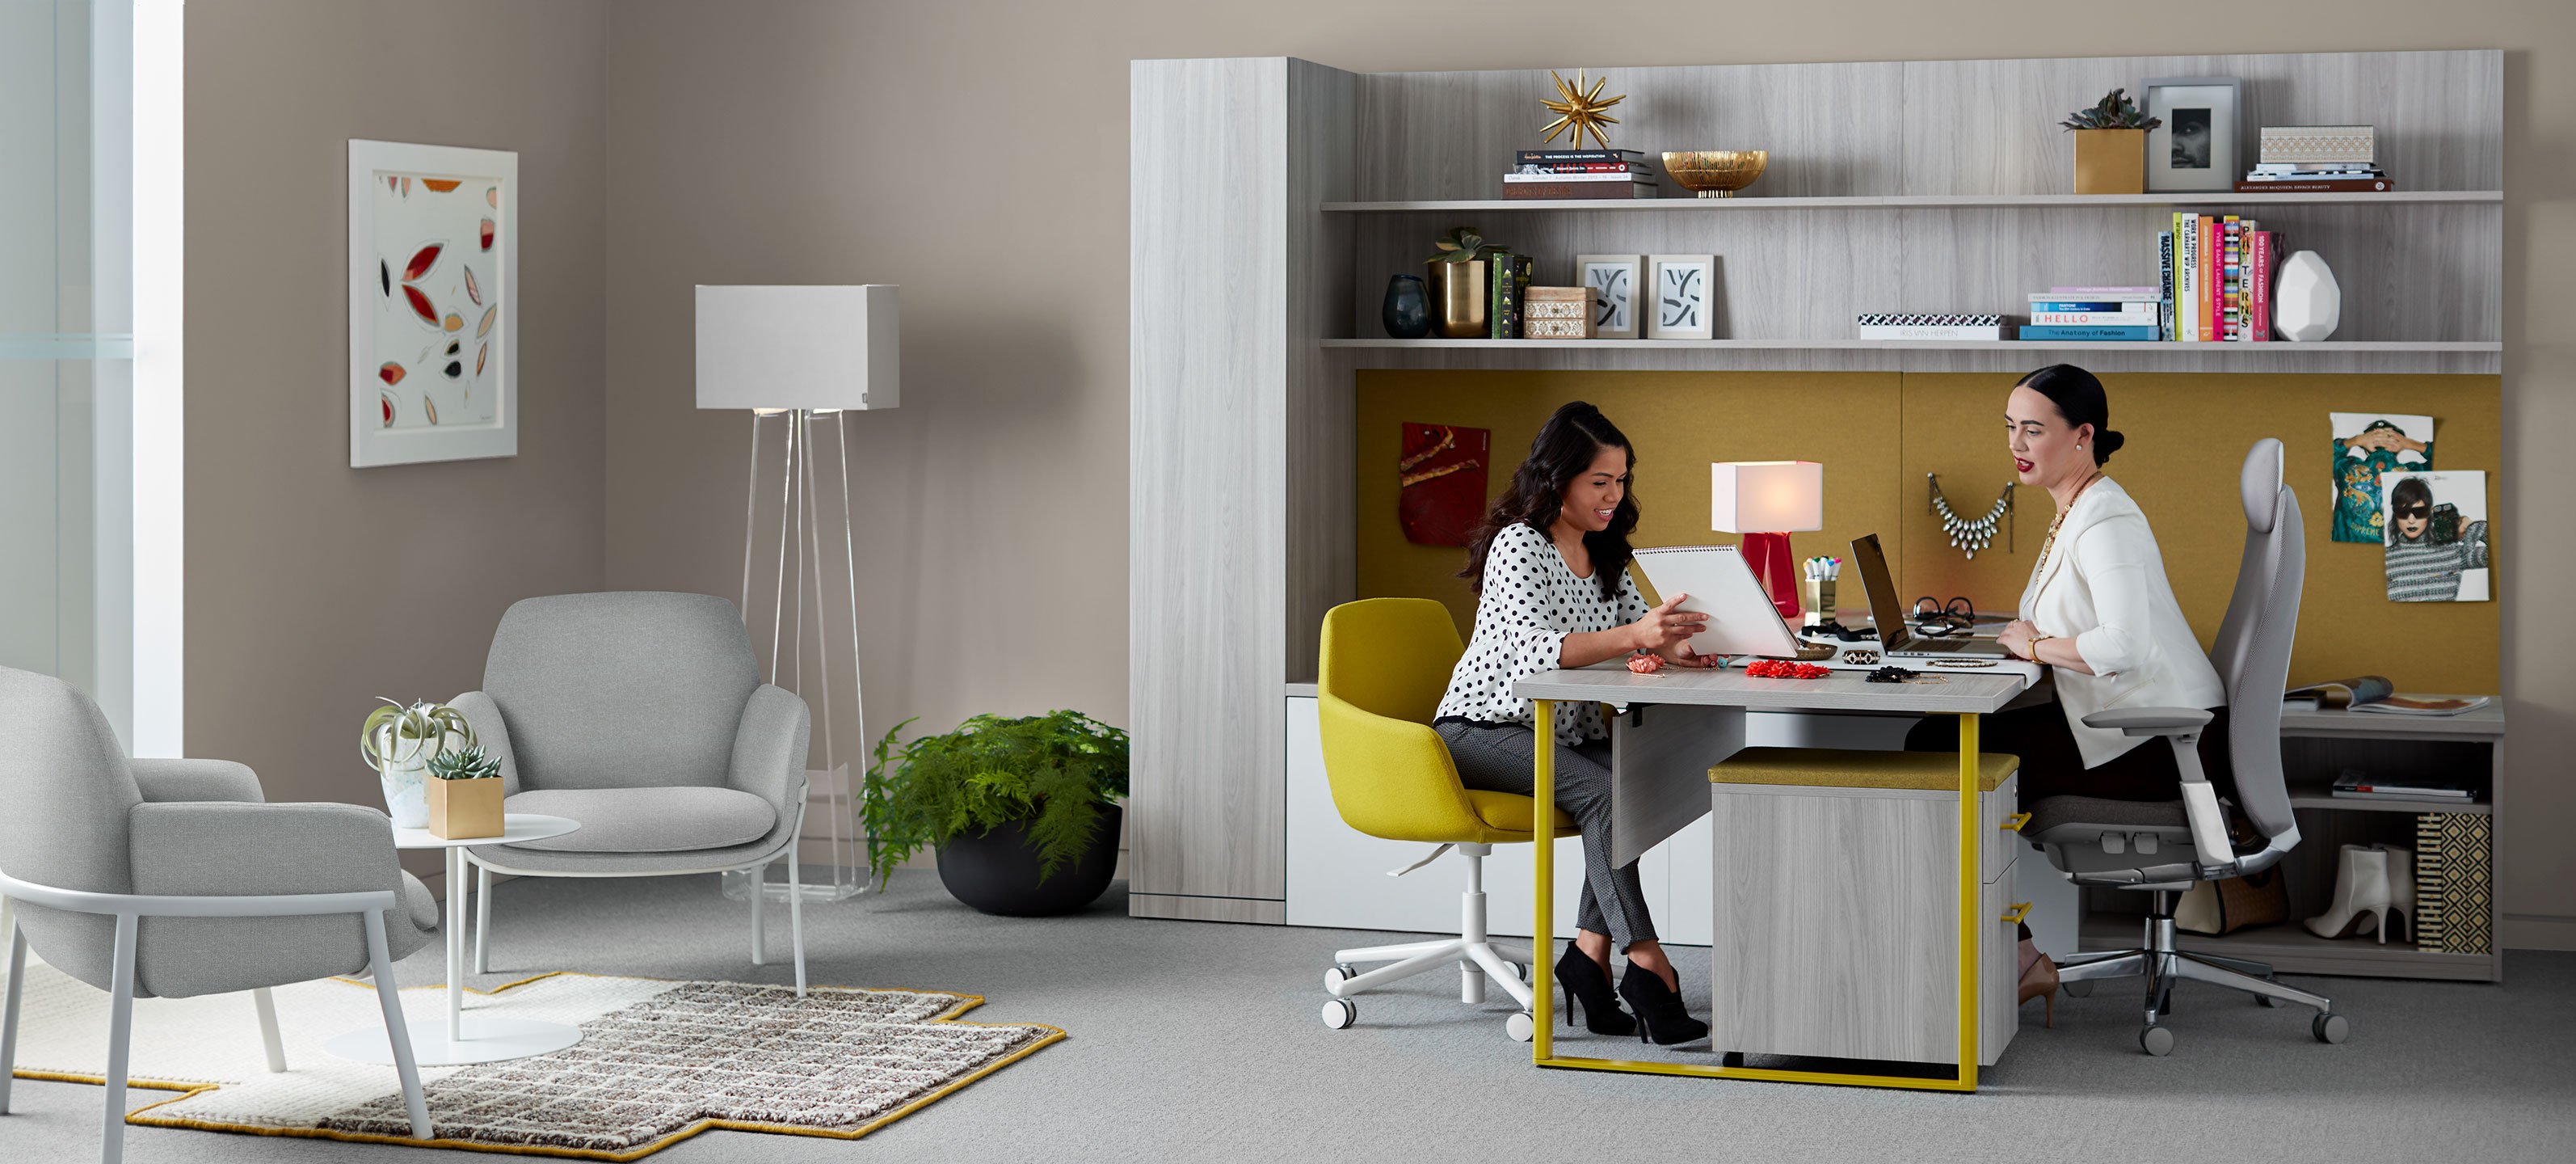 Haworth Masters Series Workspace in private office space with employees working together at veneer desk with grey chairs